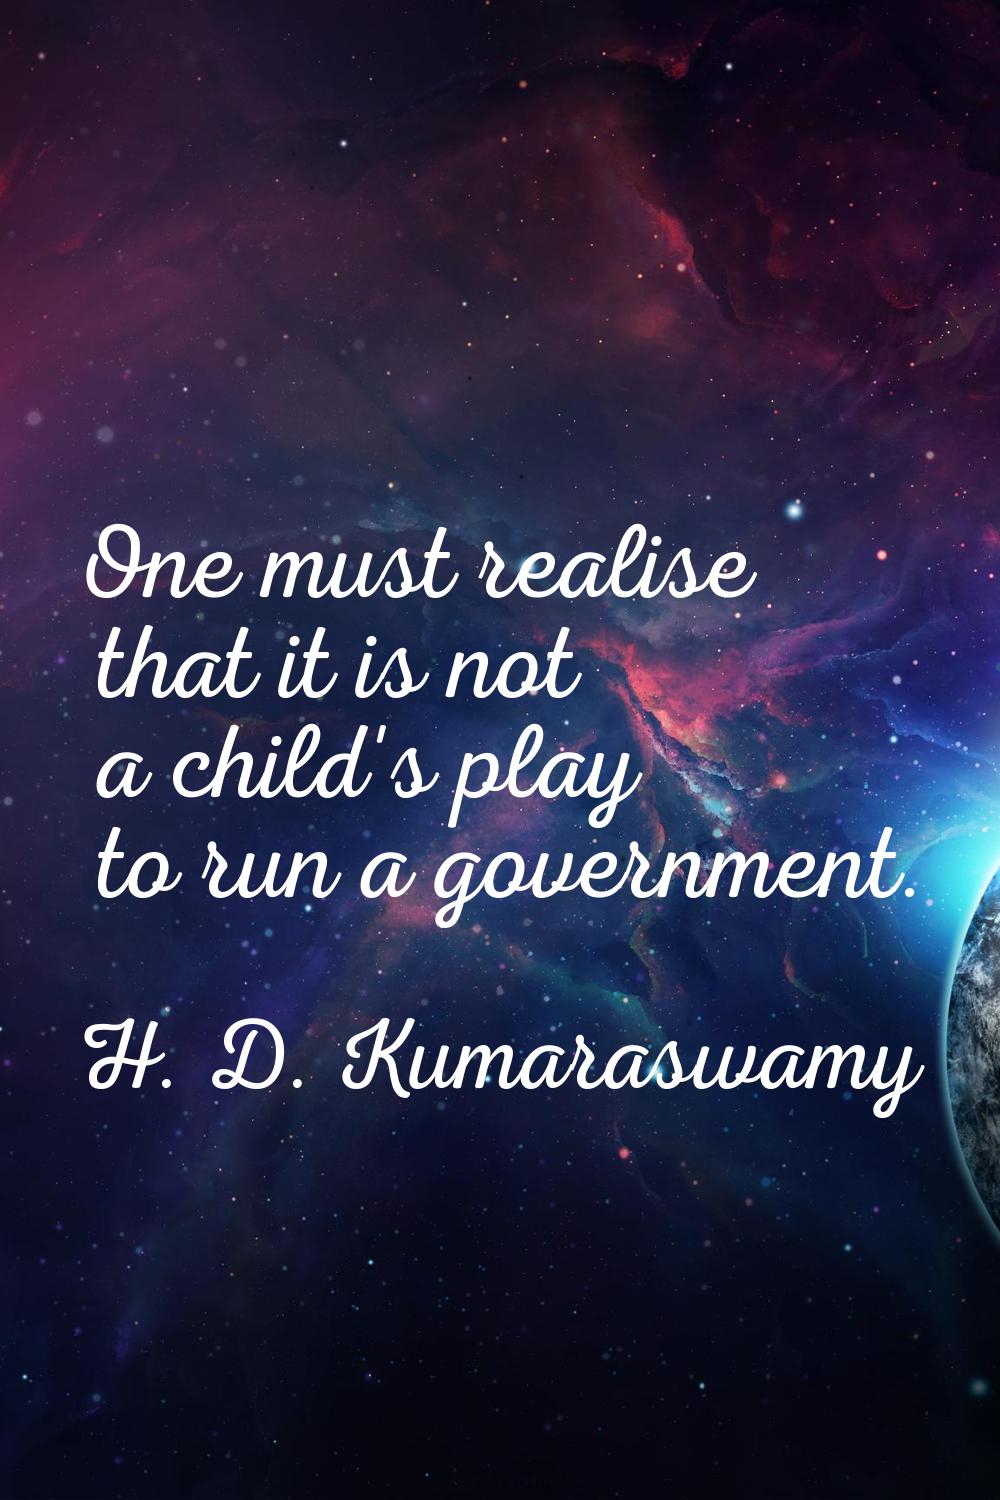 One must realise that it is not a child's play to run a government.